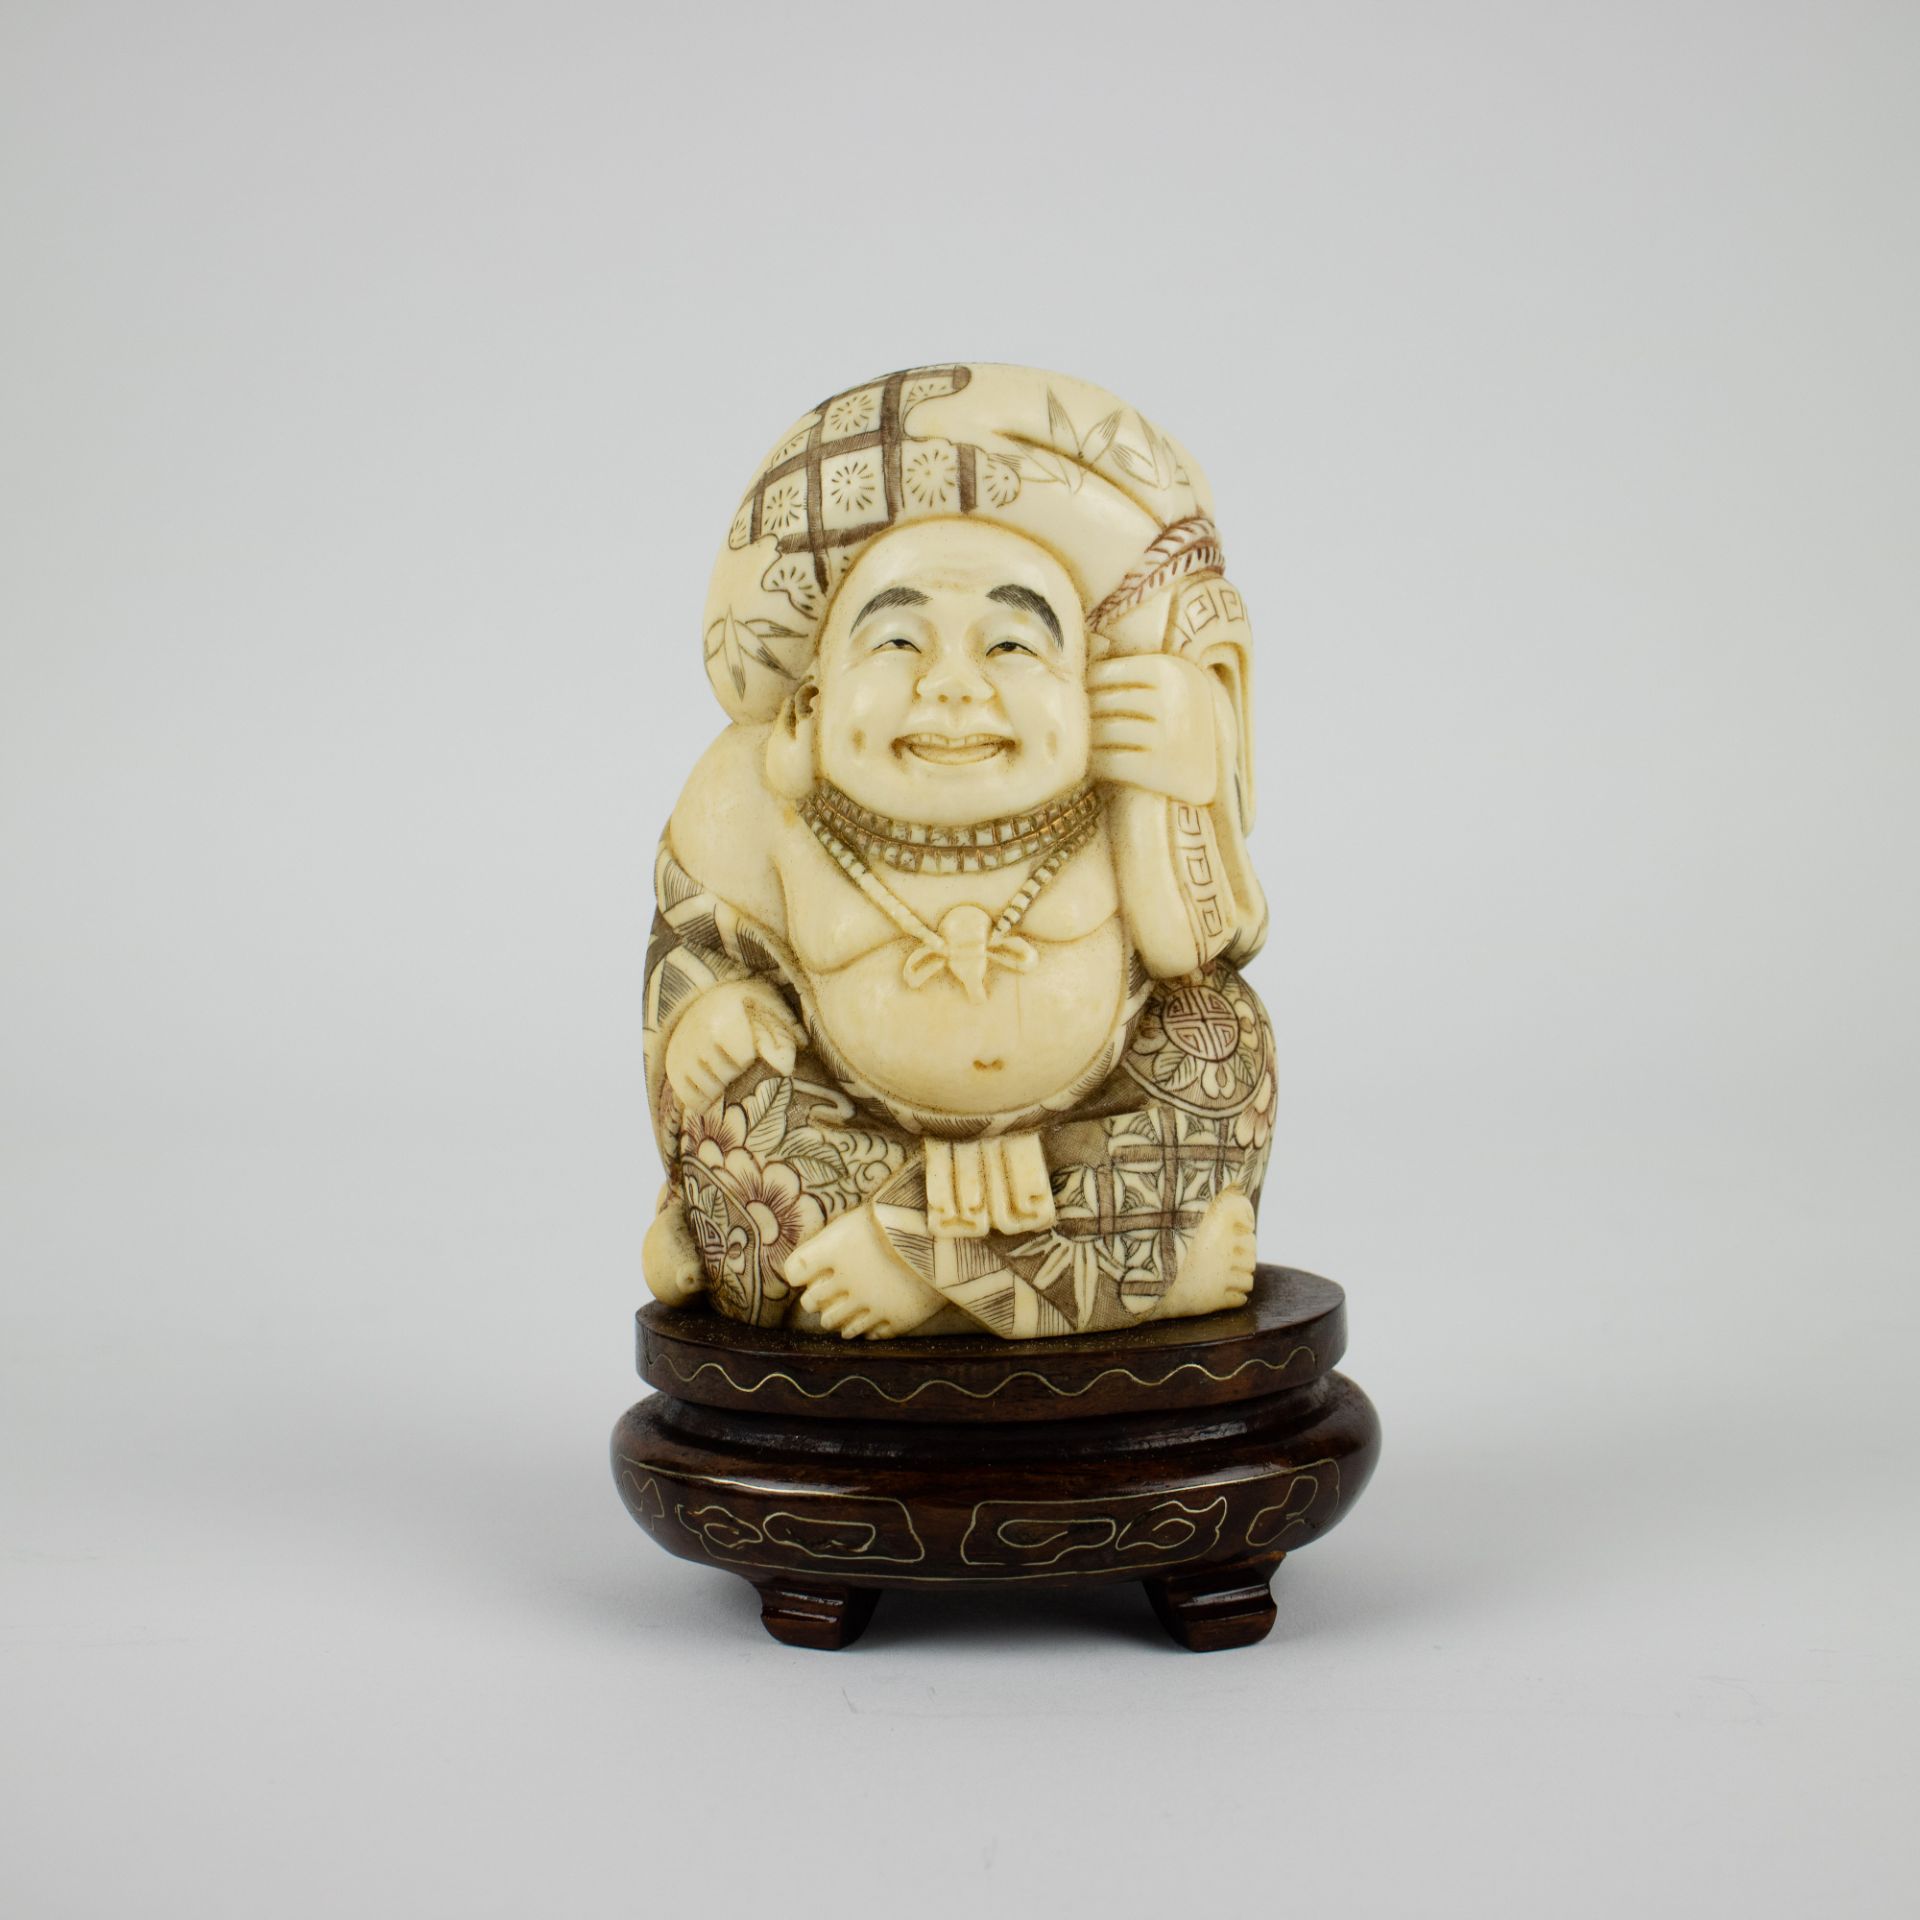 A Chinese Putai ivory carving